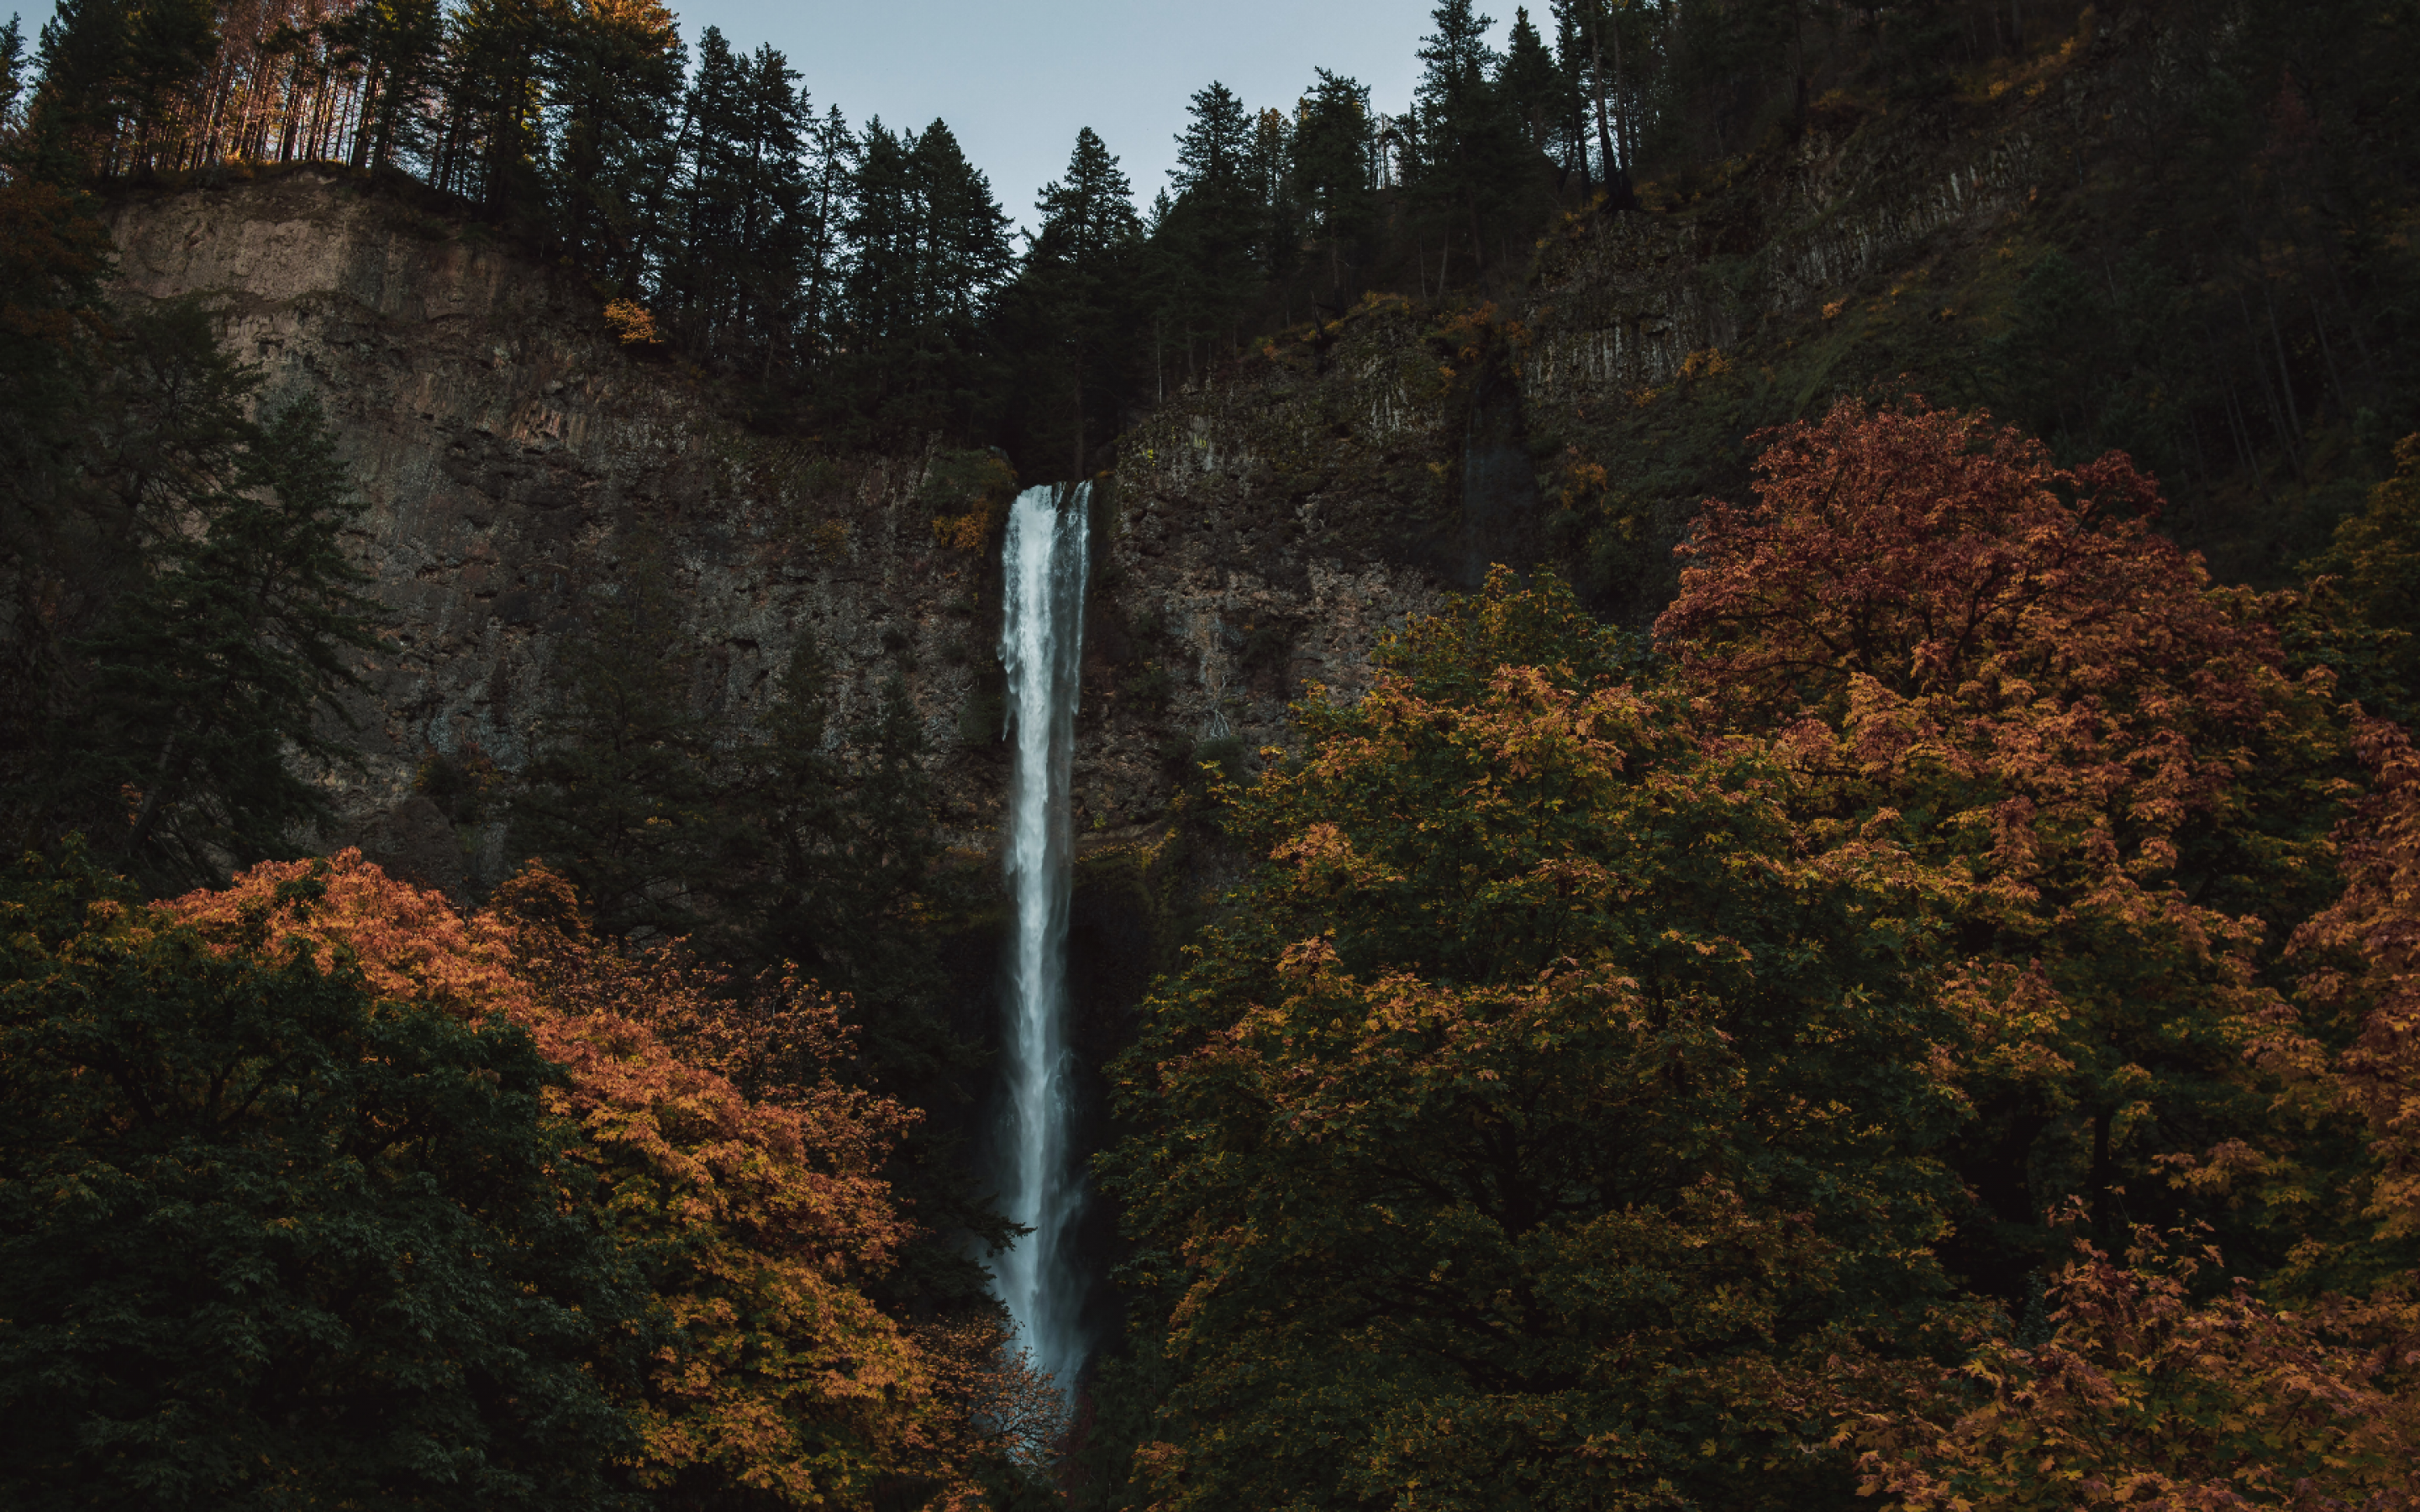 Download 2880x1800 Waterfall, Oregon, United States, Autumn, Fall, Trees, Forest Wallpaper for MacBook Pro 15 inch